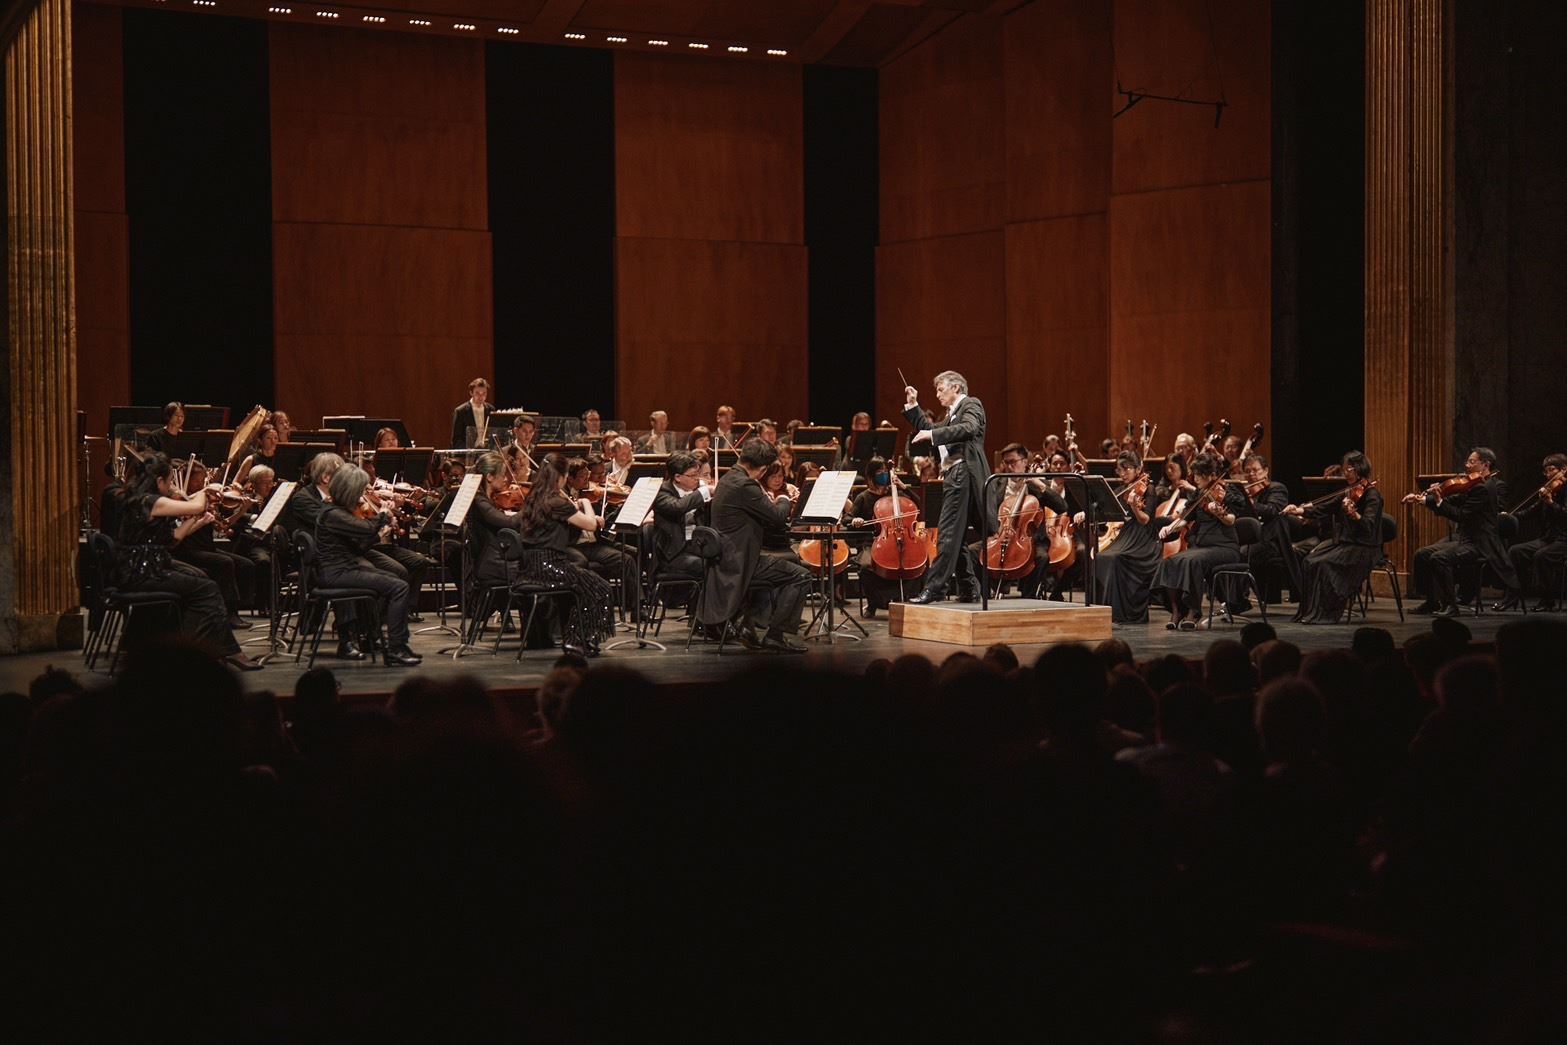 National Symphony Orchestra wraps up European tour with dazzling show in Paris